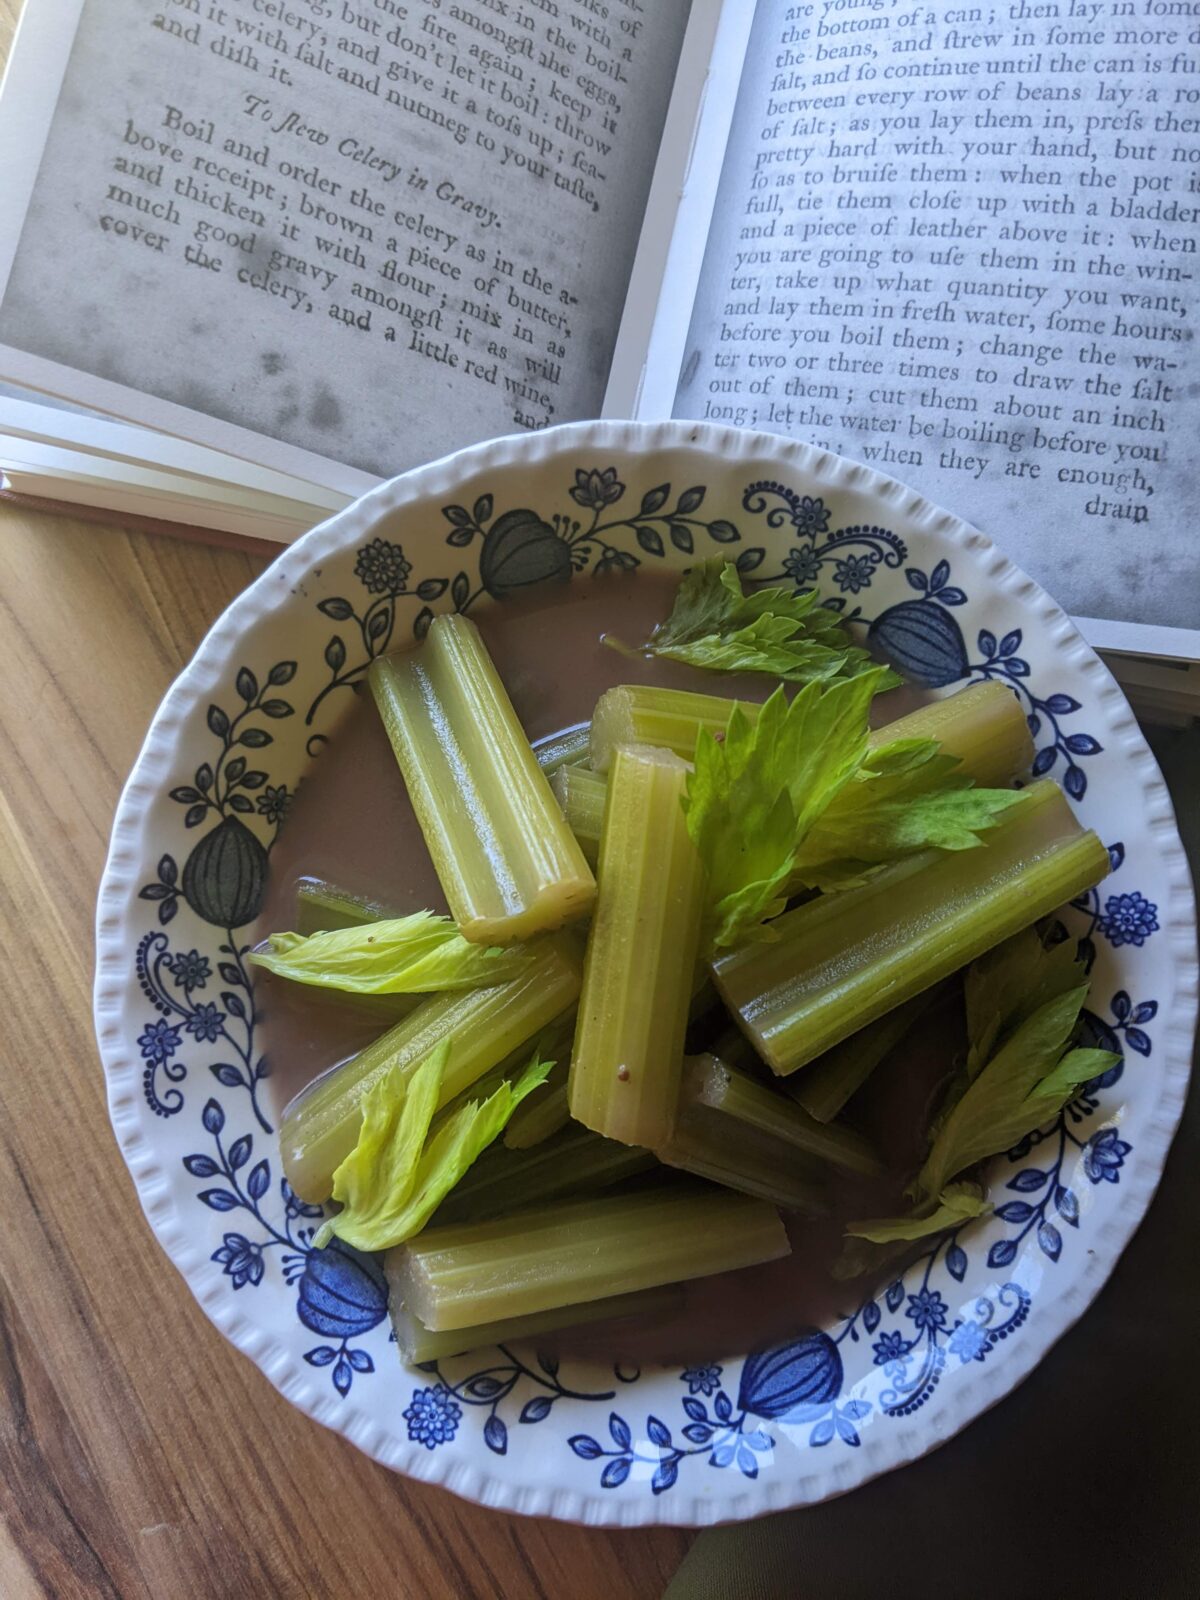 2 inch pieces of celery in a brown sauce i9n a blue and white bowl. The bowl sits on a wooden background with an open book in the background.